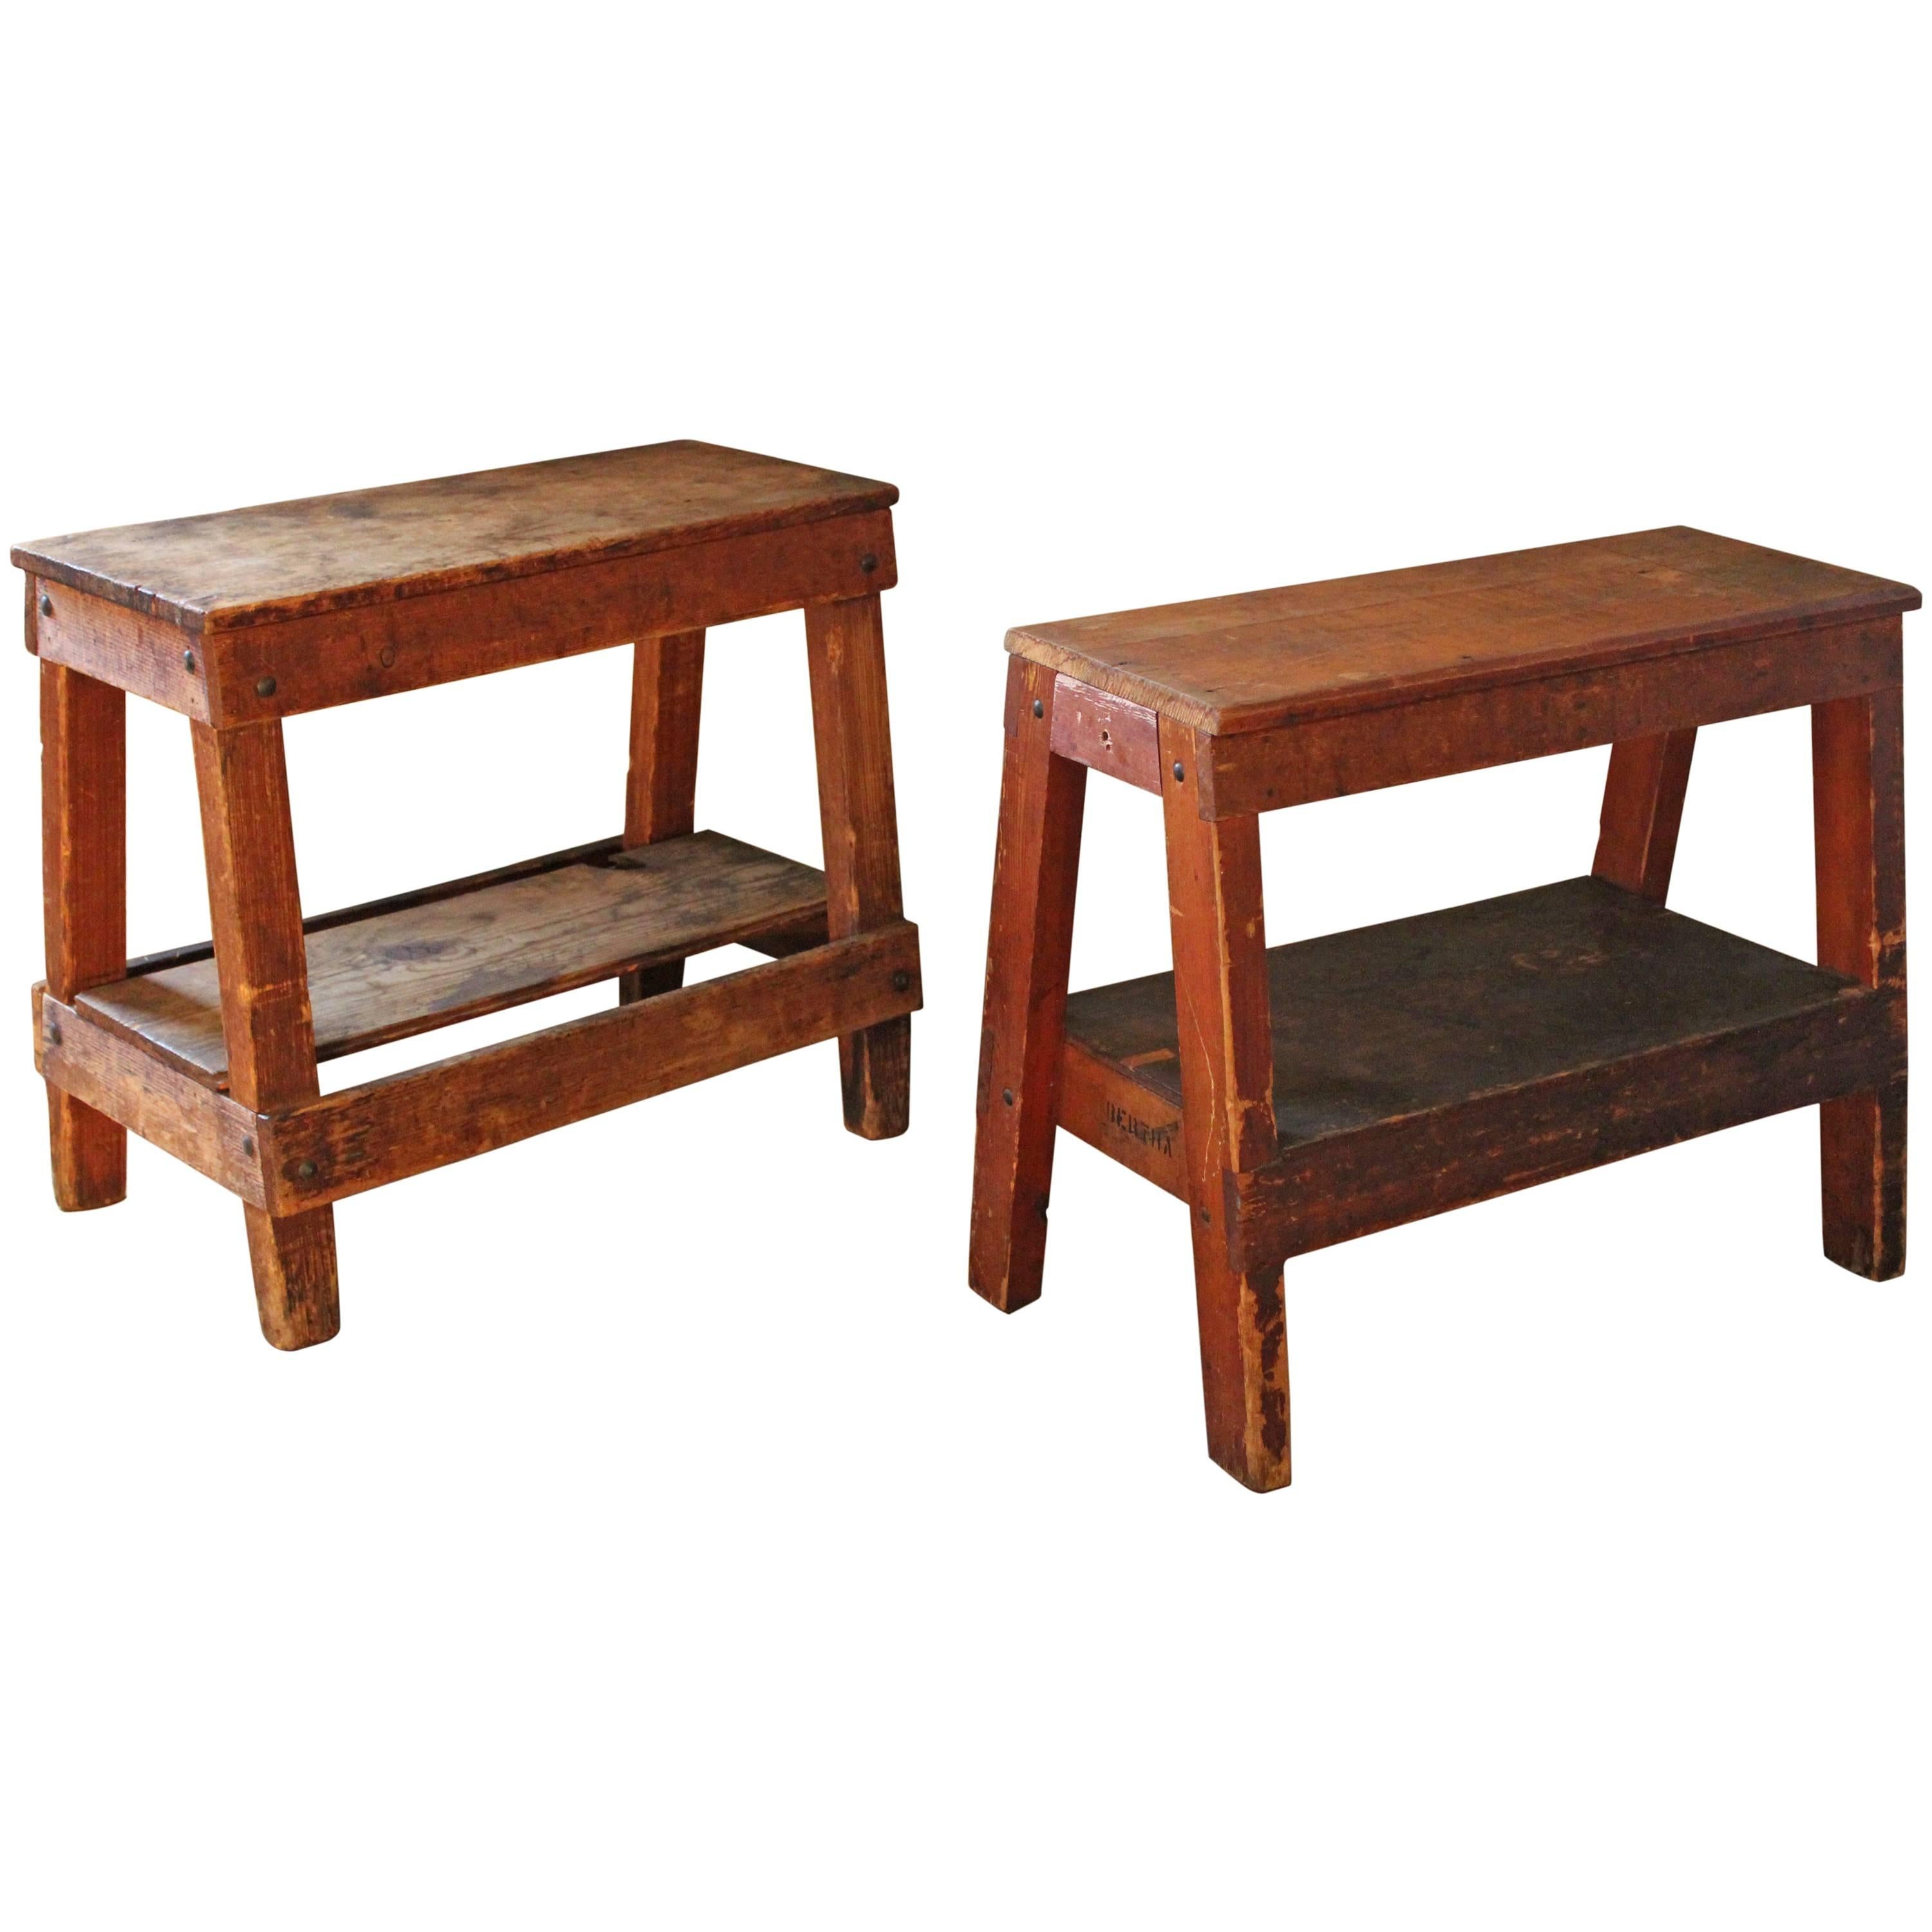 Pair of Vintage Industrial Wooden Factory Work Benches, Side End Tables Horses